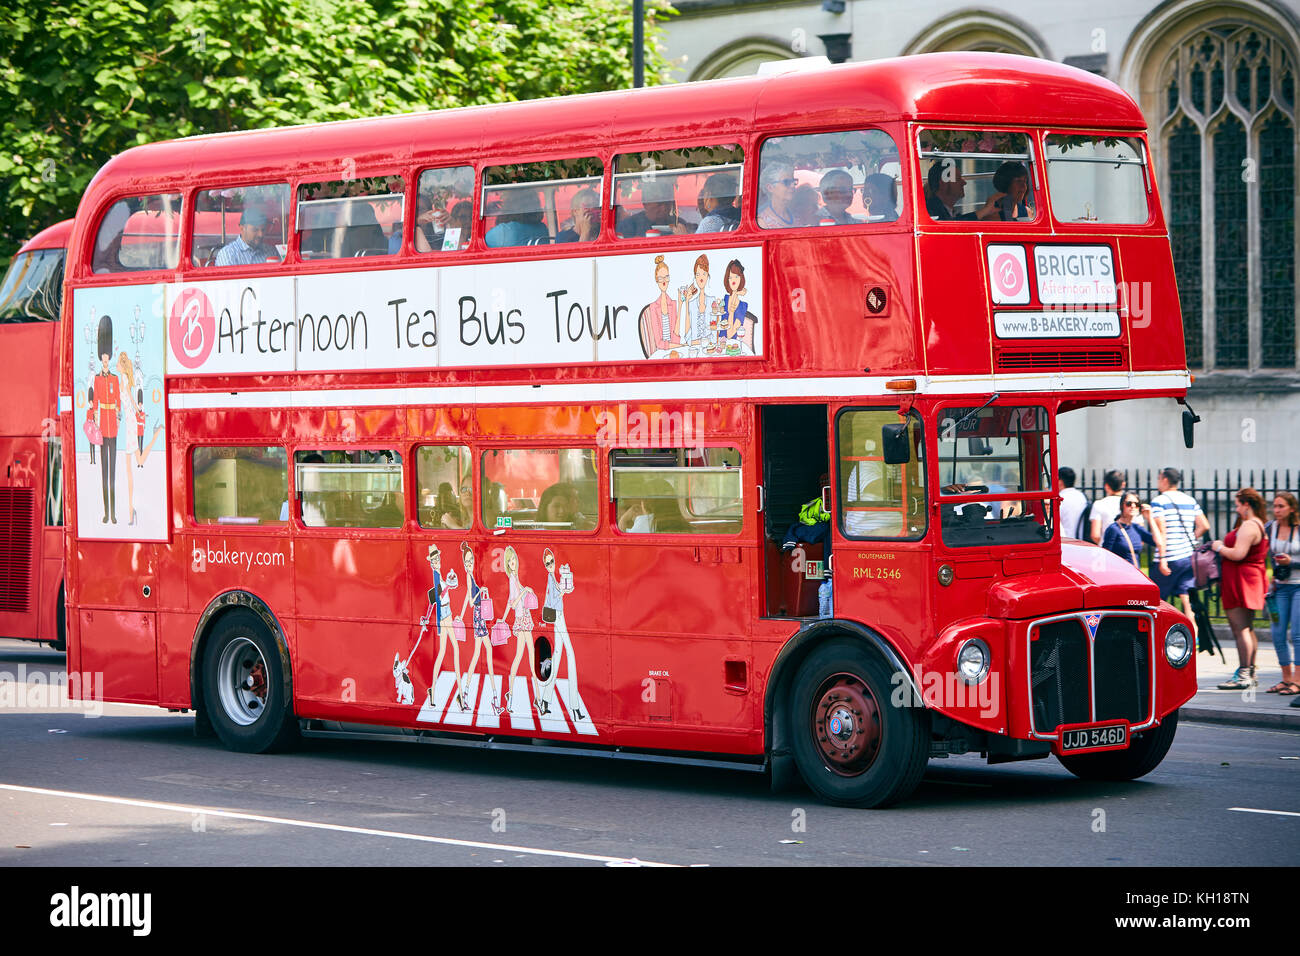 A red Routemaster bus in London providing afternoon tea bus tours by Brigit’s Bakery. Stock Photo